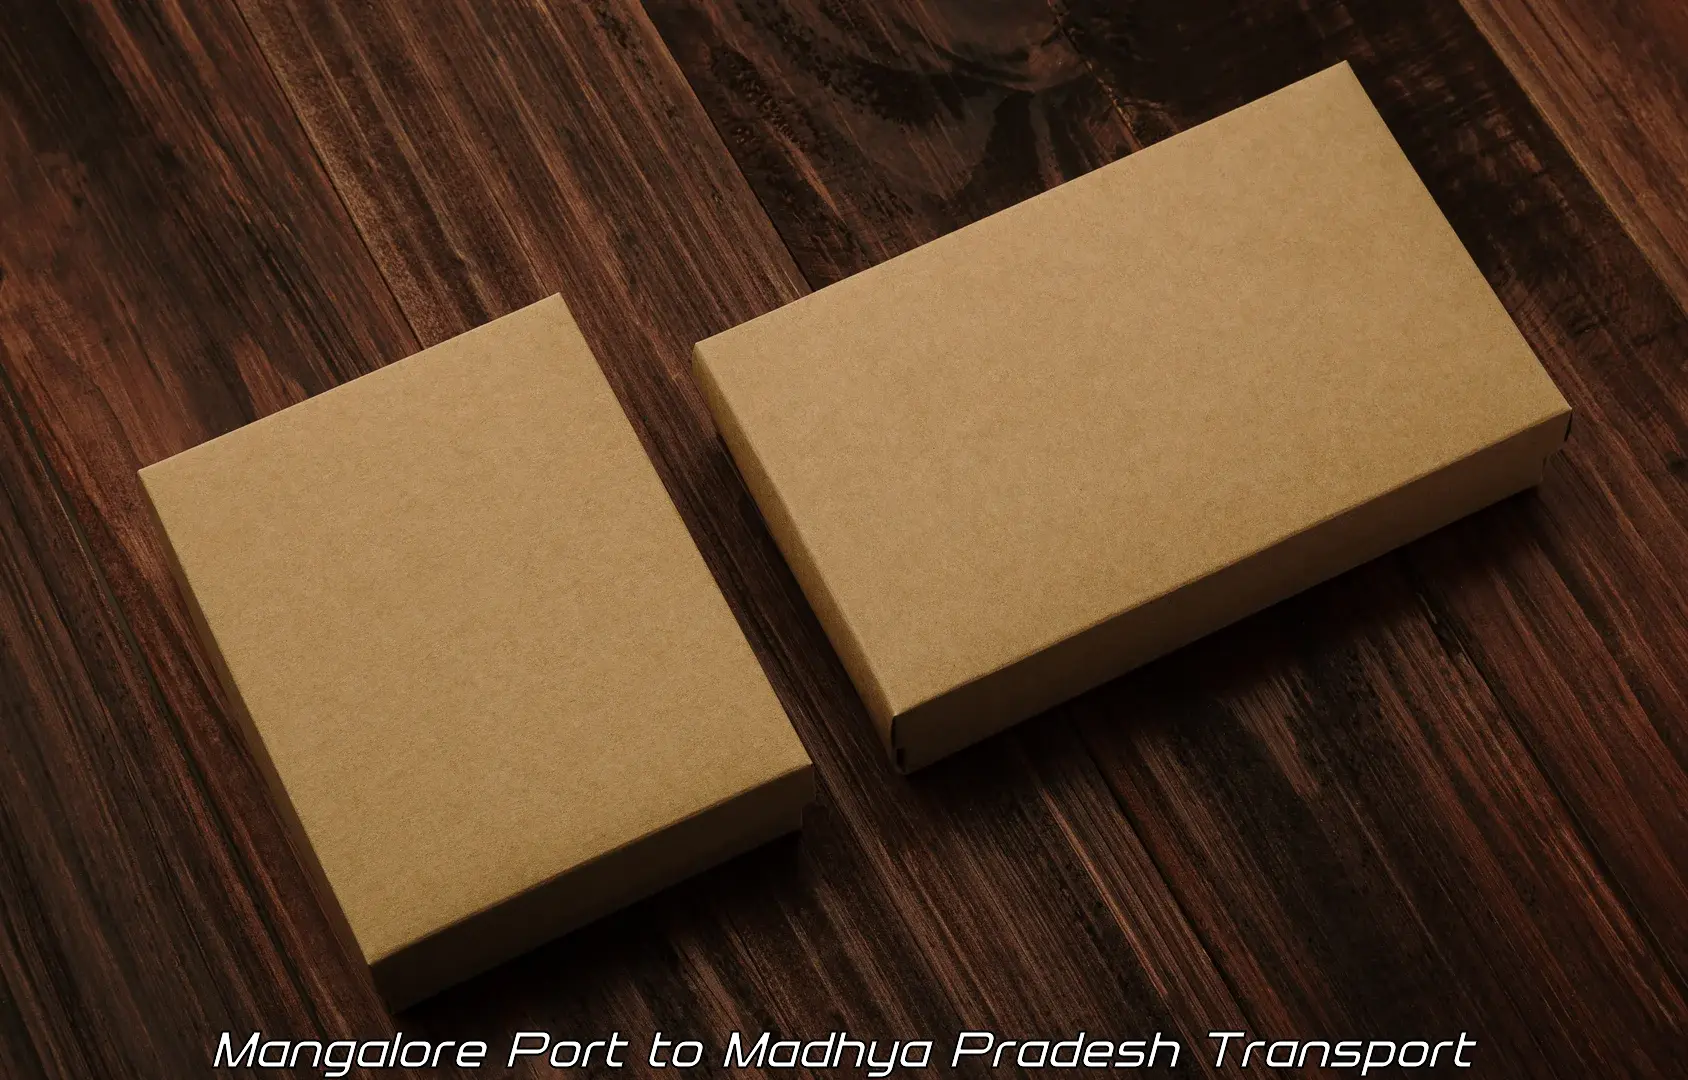 Shipping services Mangalore Port to Sausar